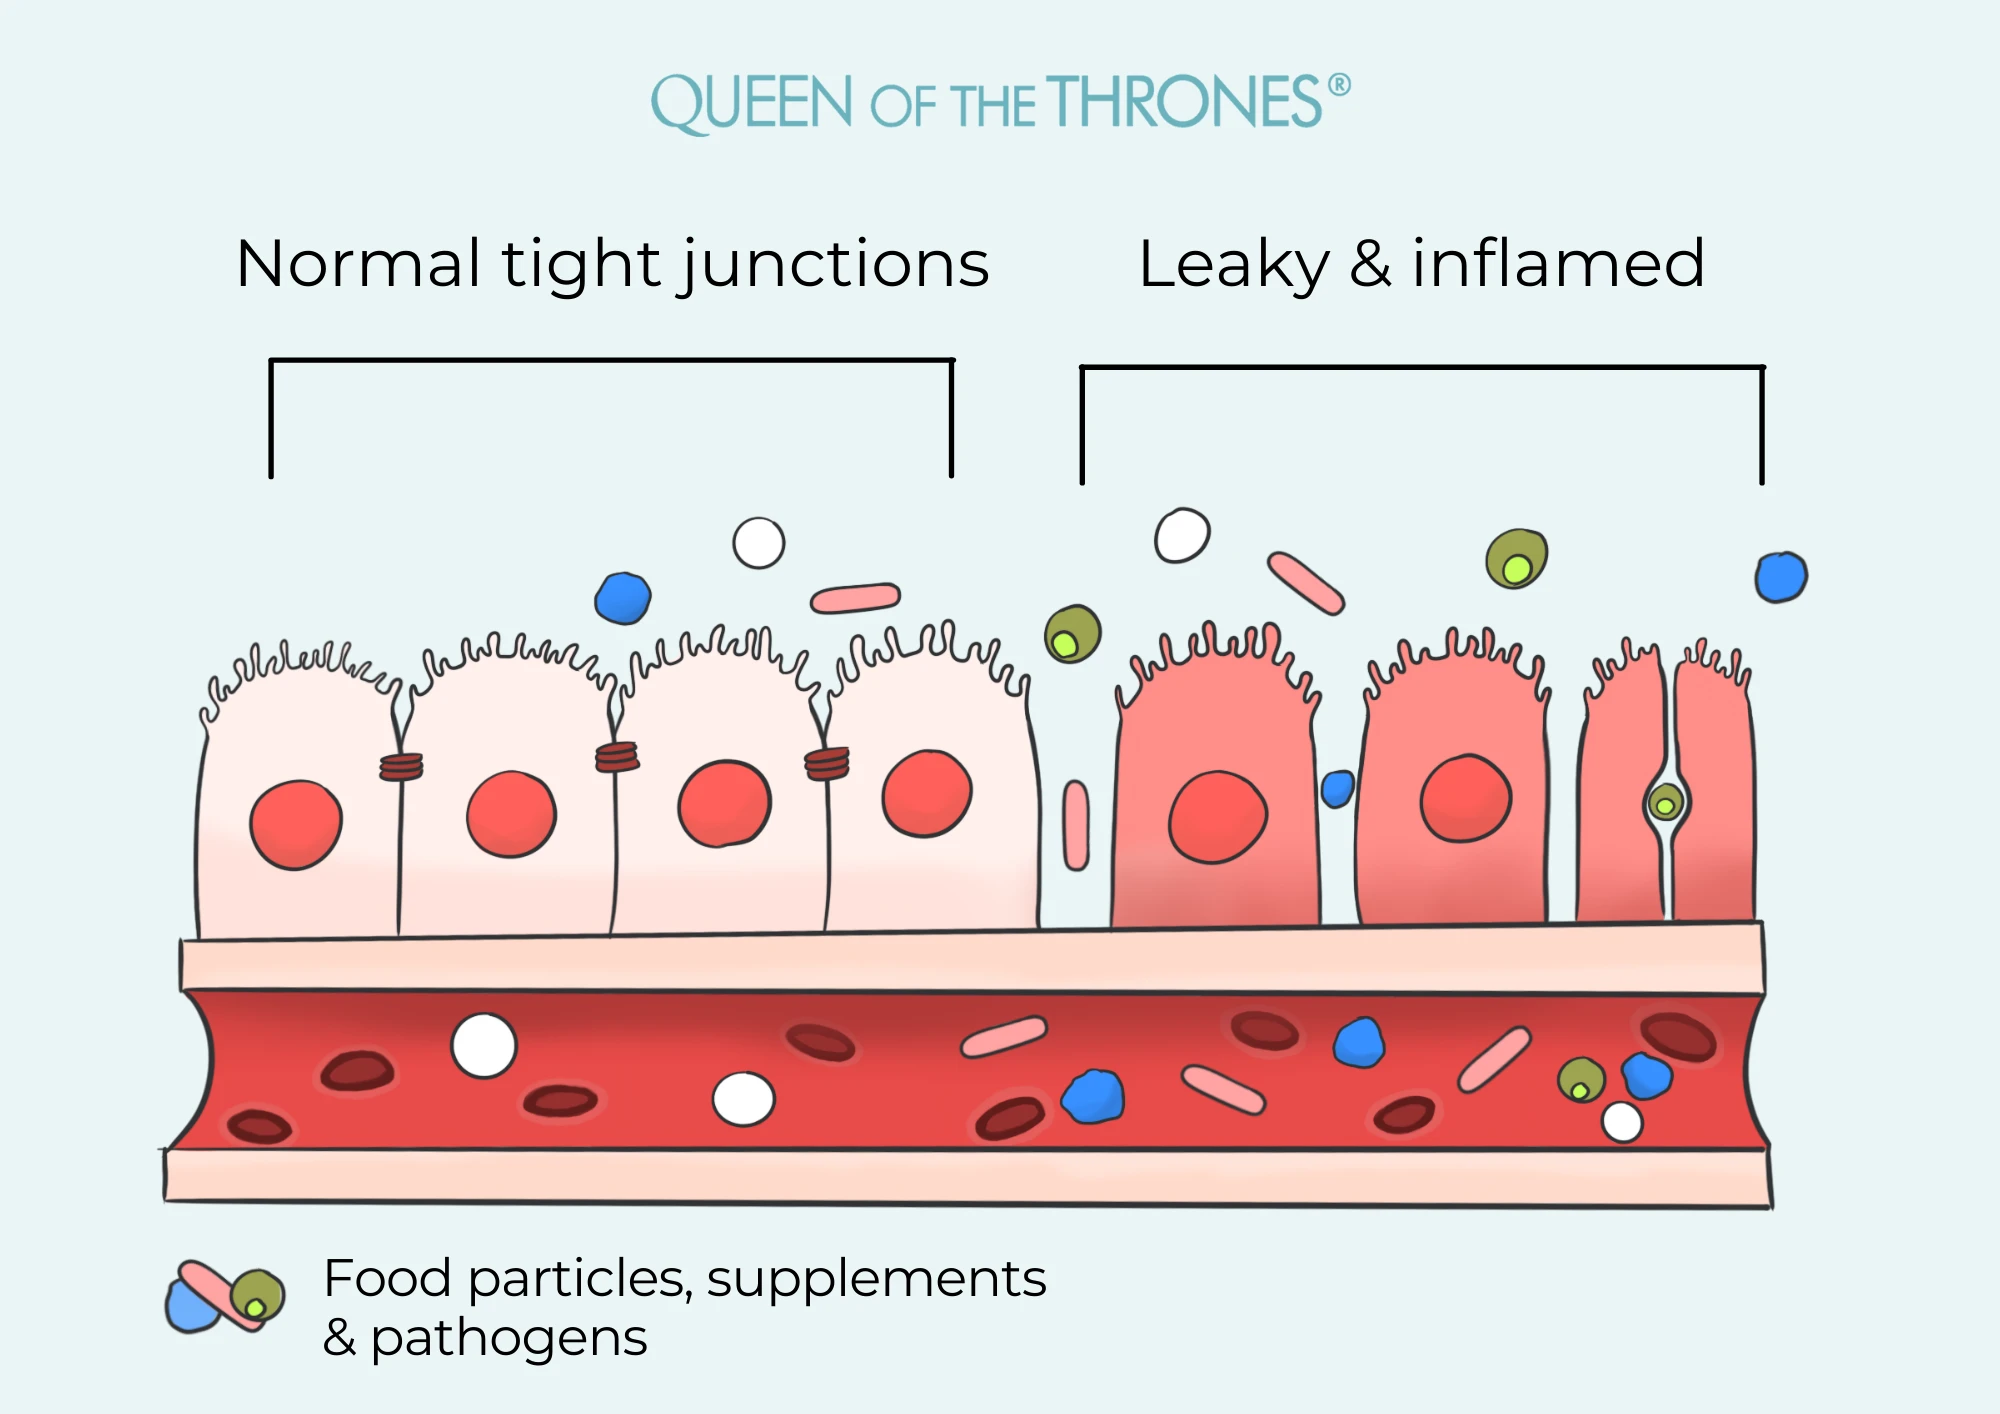 Leaky & Inflamed gut illustration by Queen of the Thrones